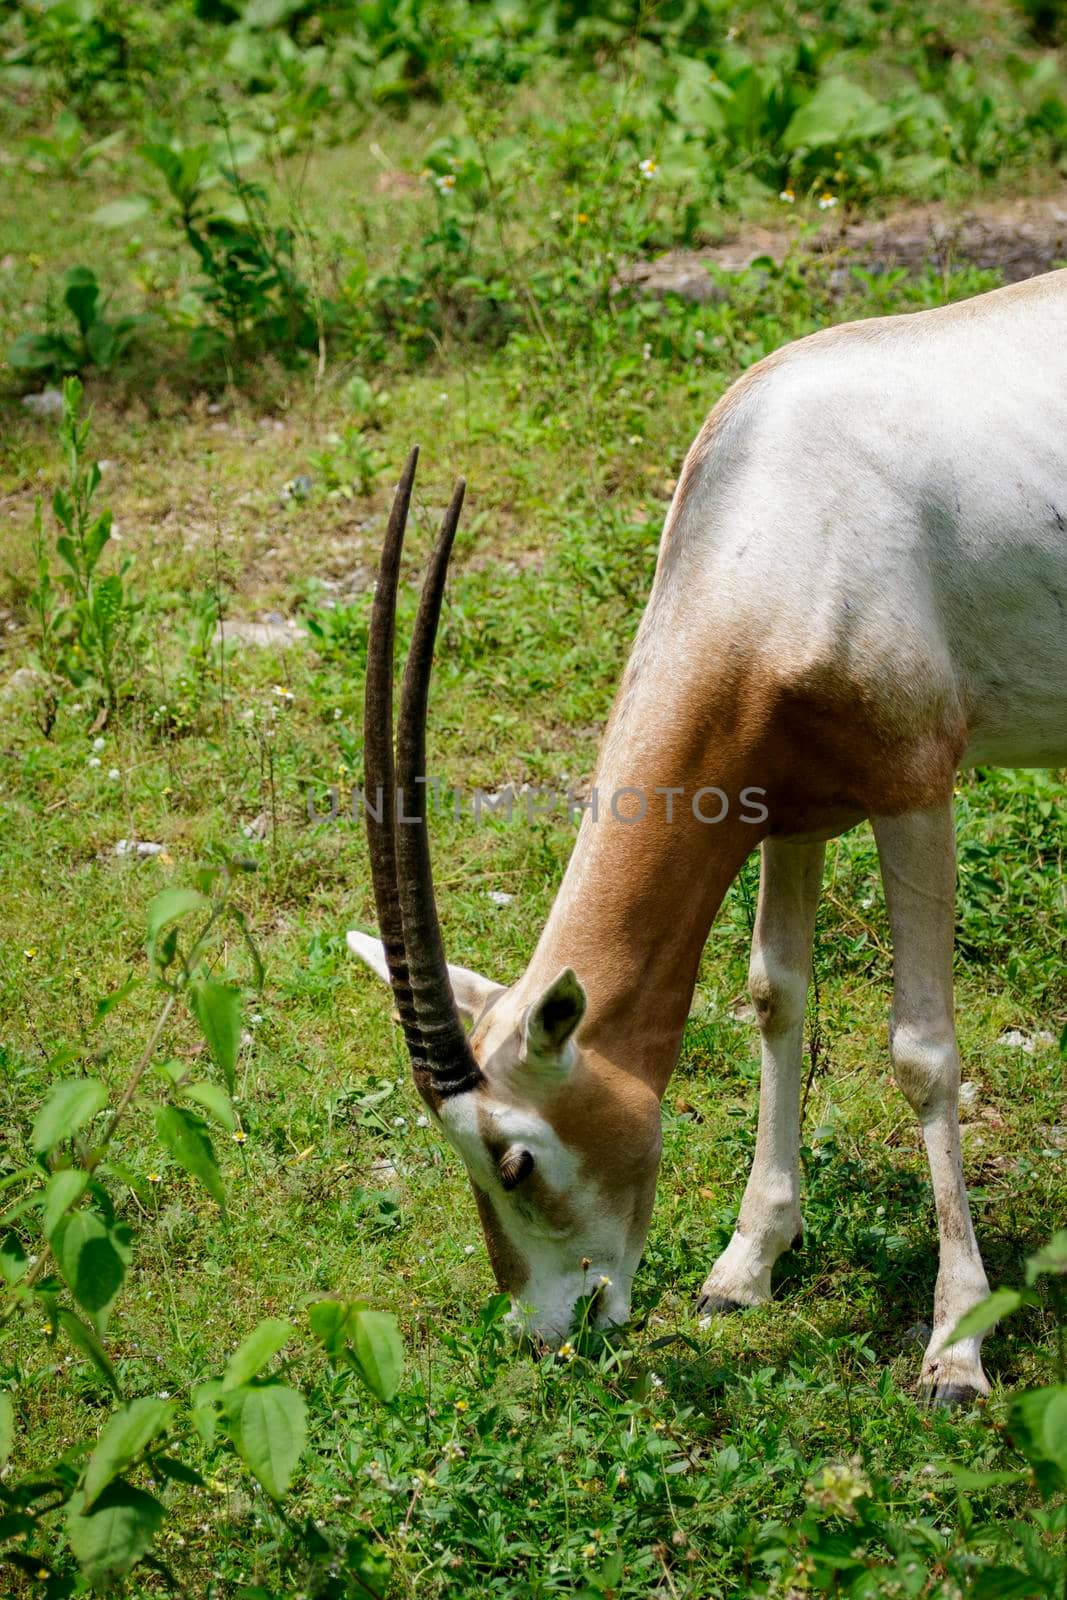 Image of Scimitar-horned Oryx (Oryx dammah) are eating grass on nature background. Wild Animals.